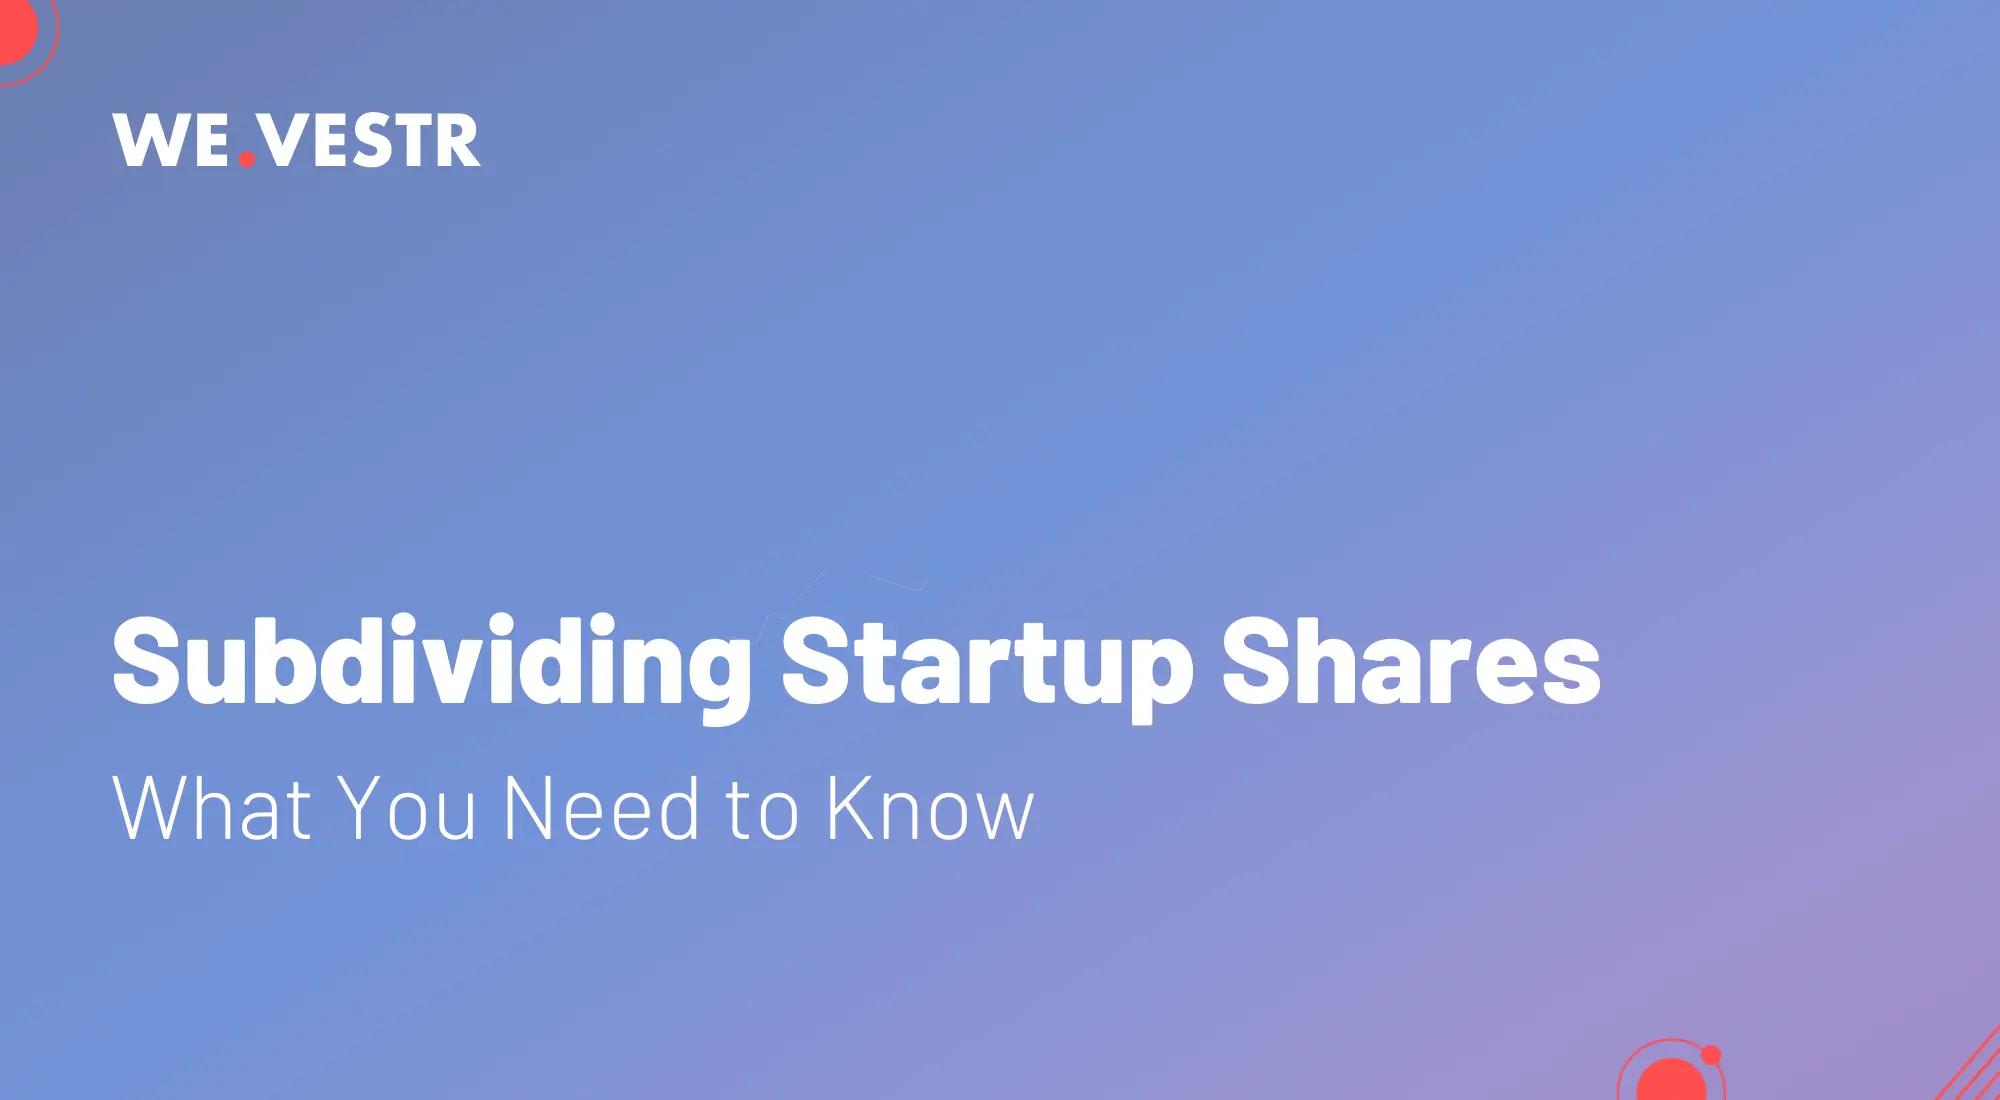 Subdividing shares in your startup